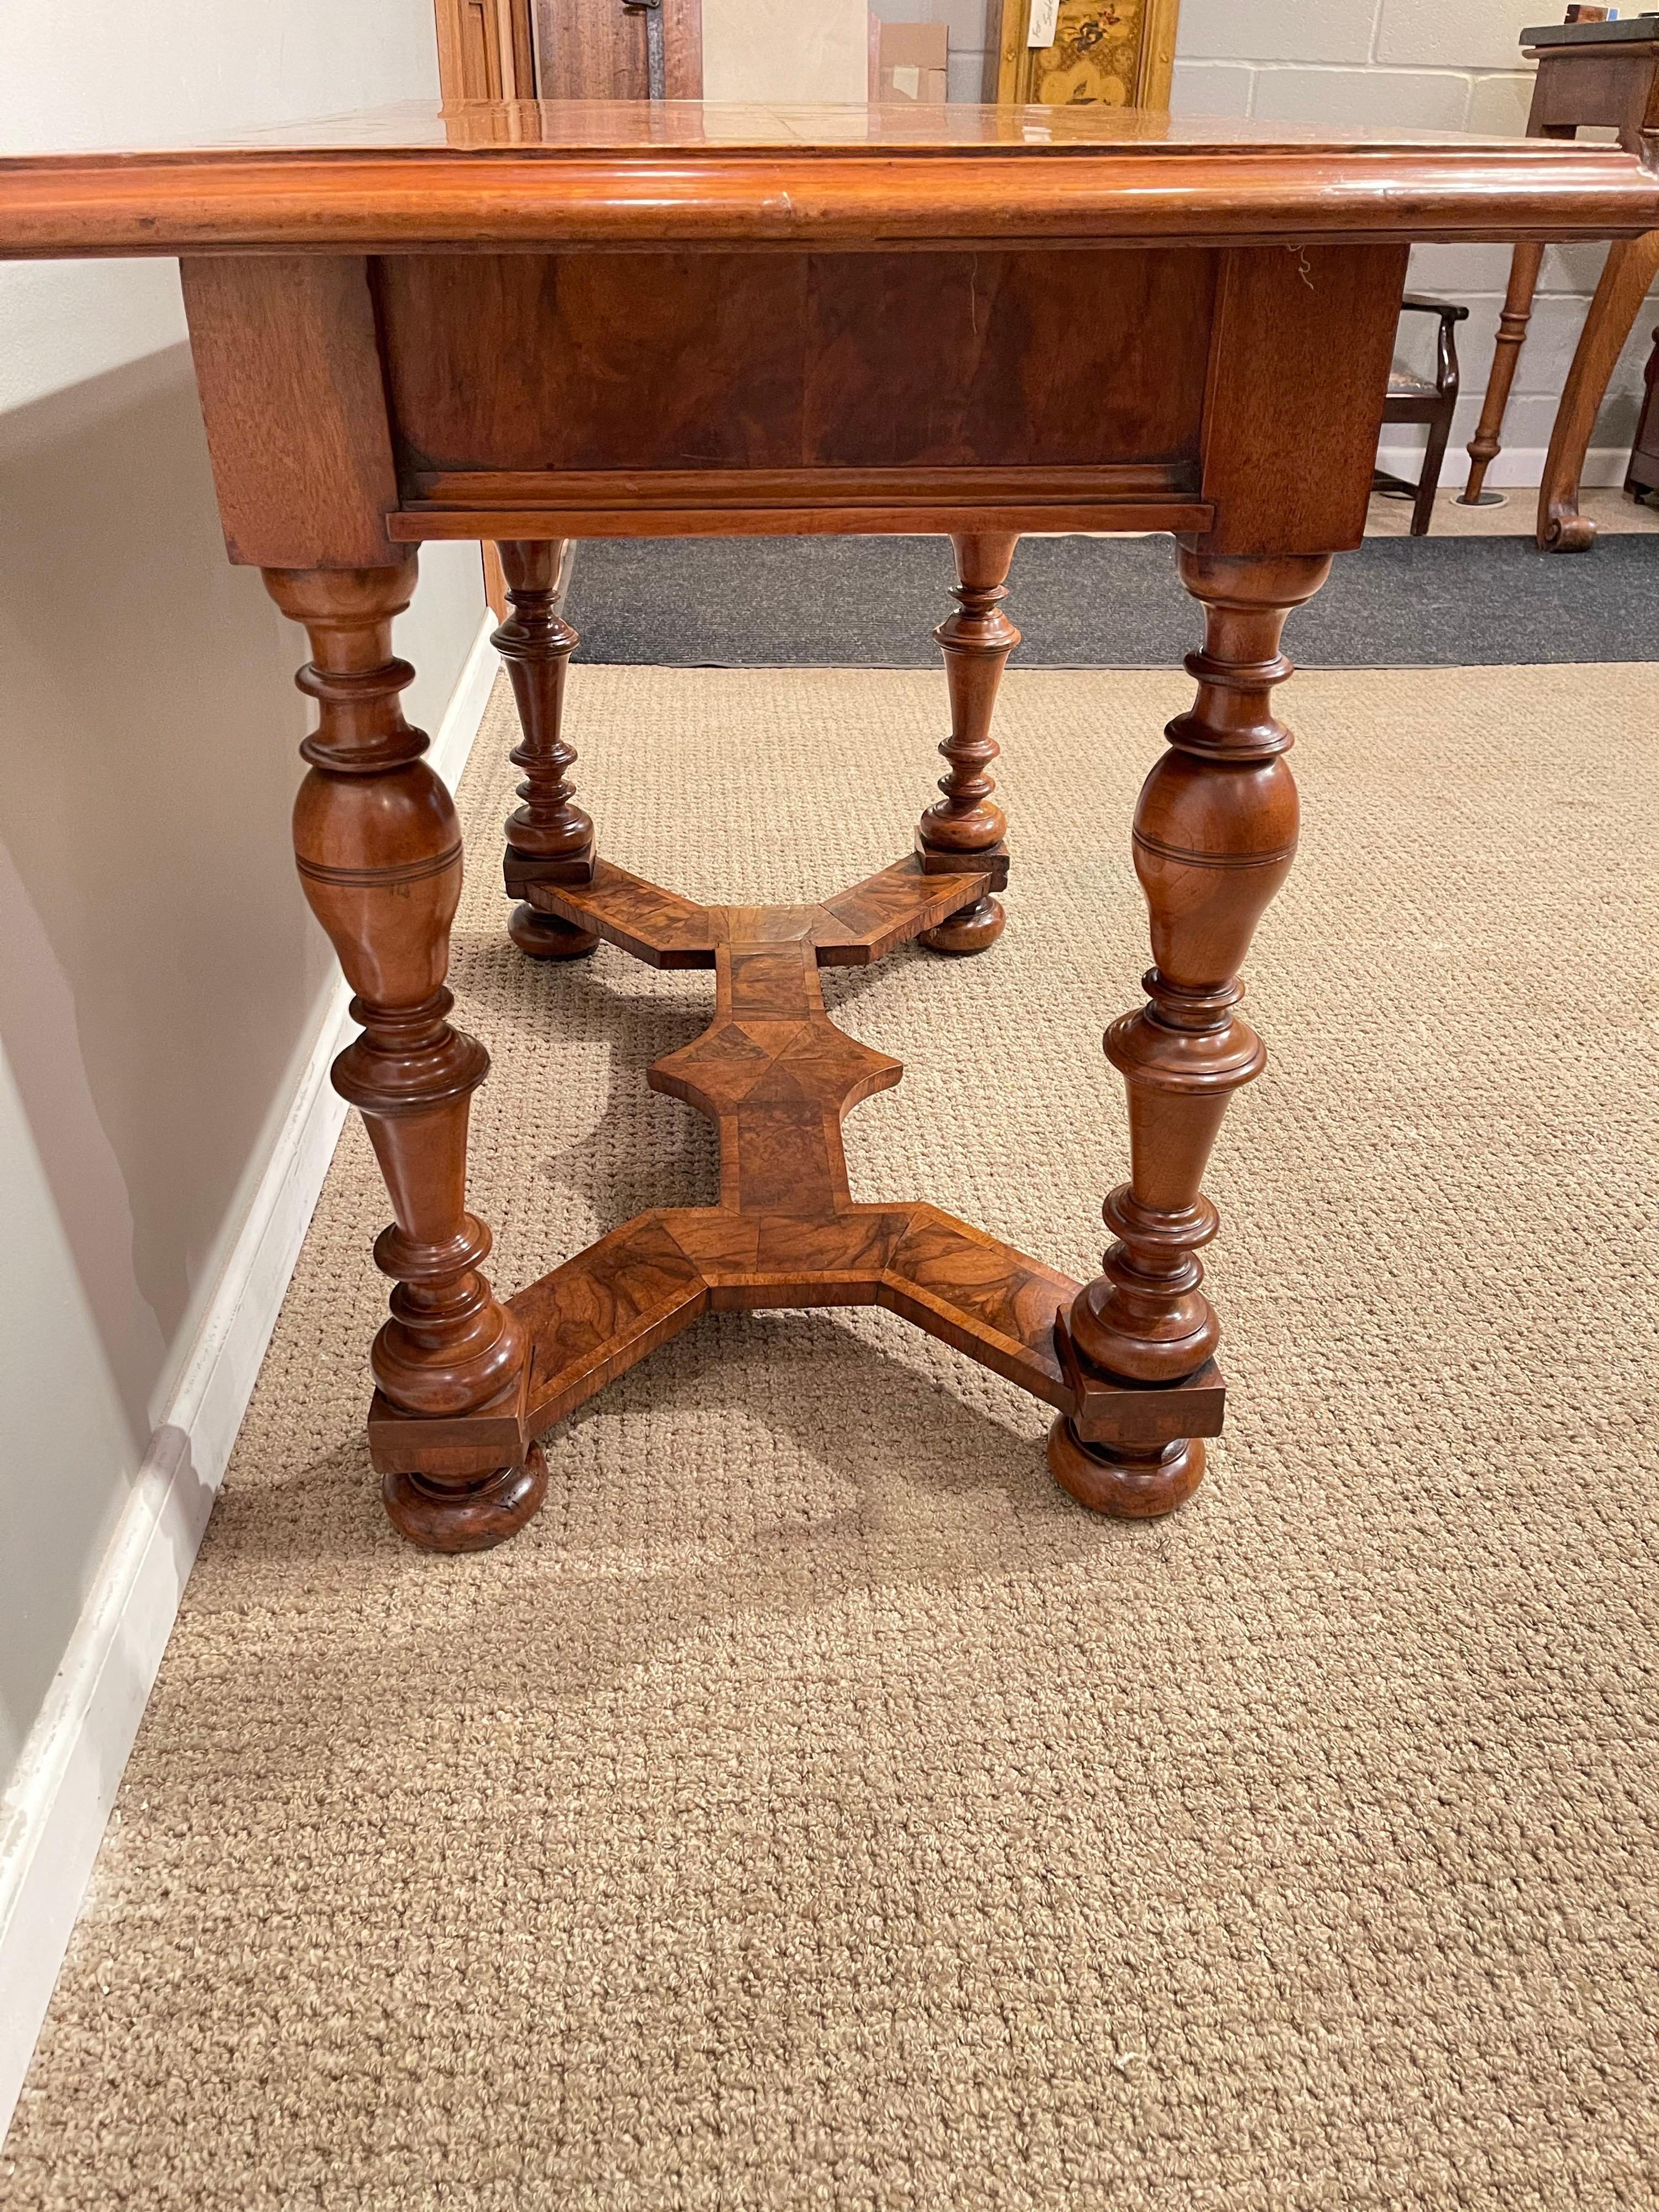 English Turned Walnut Center Table, Late 17th Century